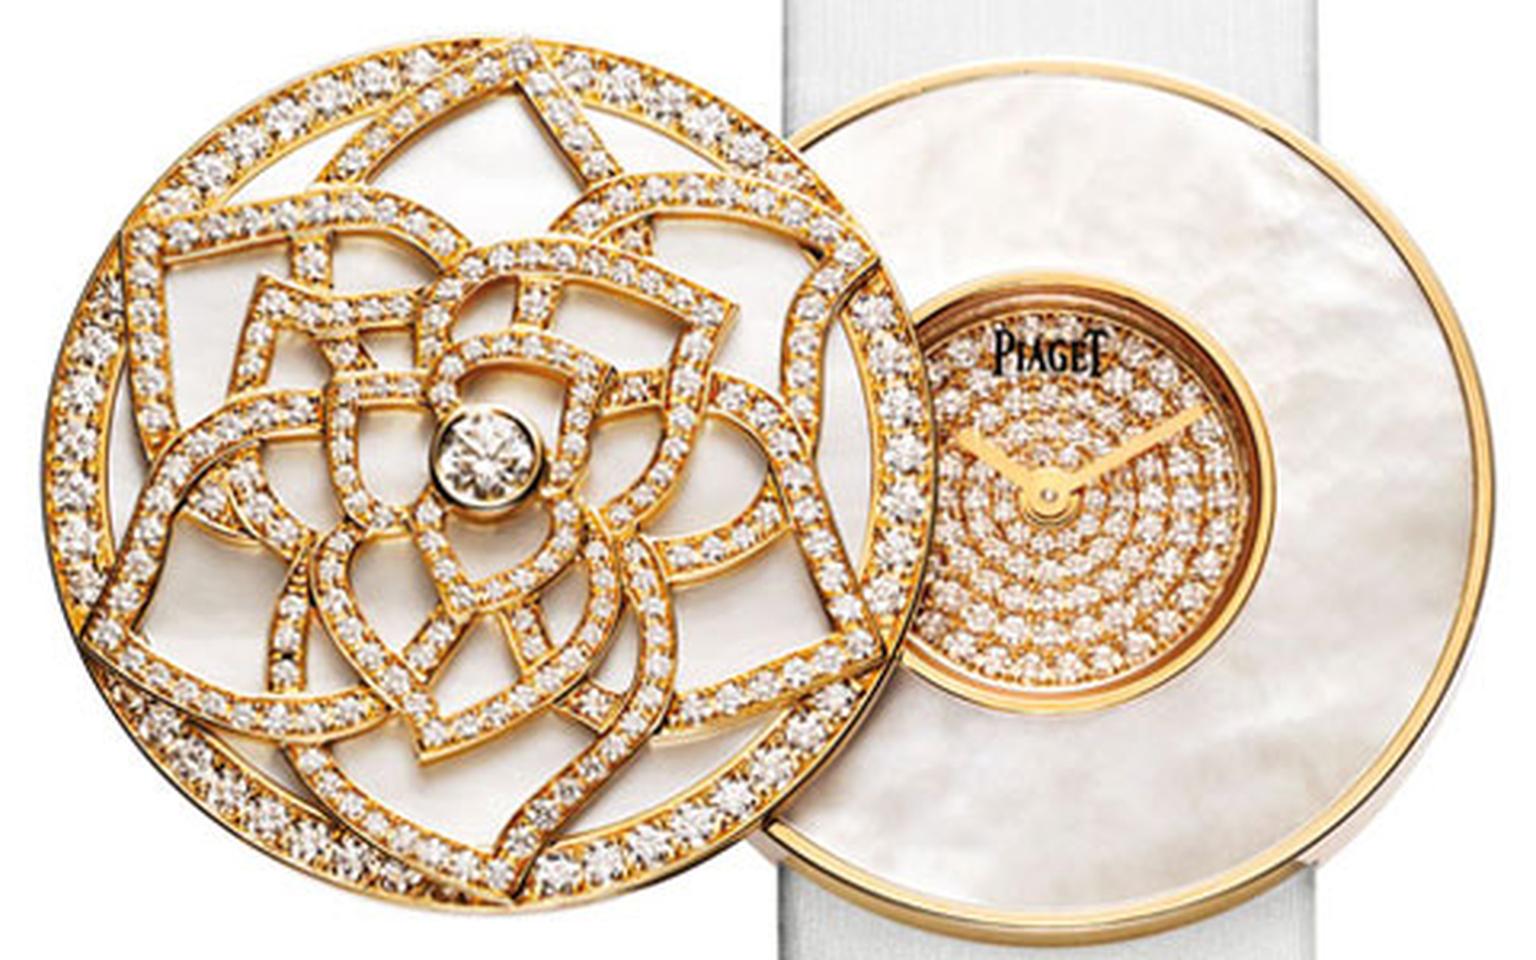 Piaget.-Limelight-Garden-Party-Secret-Watch.-Pink-gold,-white-mother-of-pearl-and-diamonds.-POA-HP